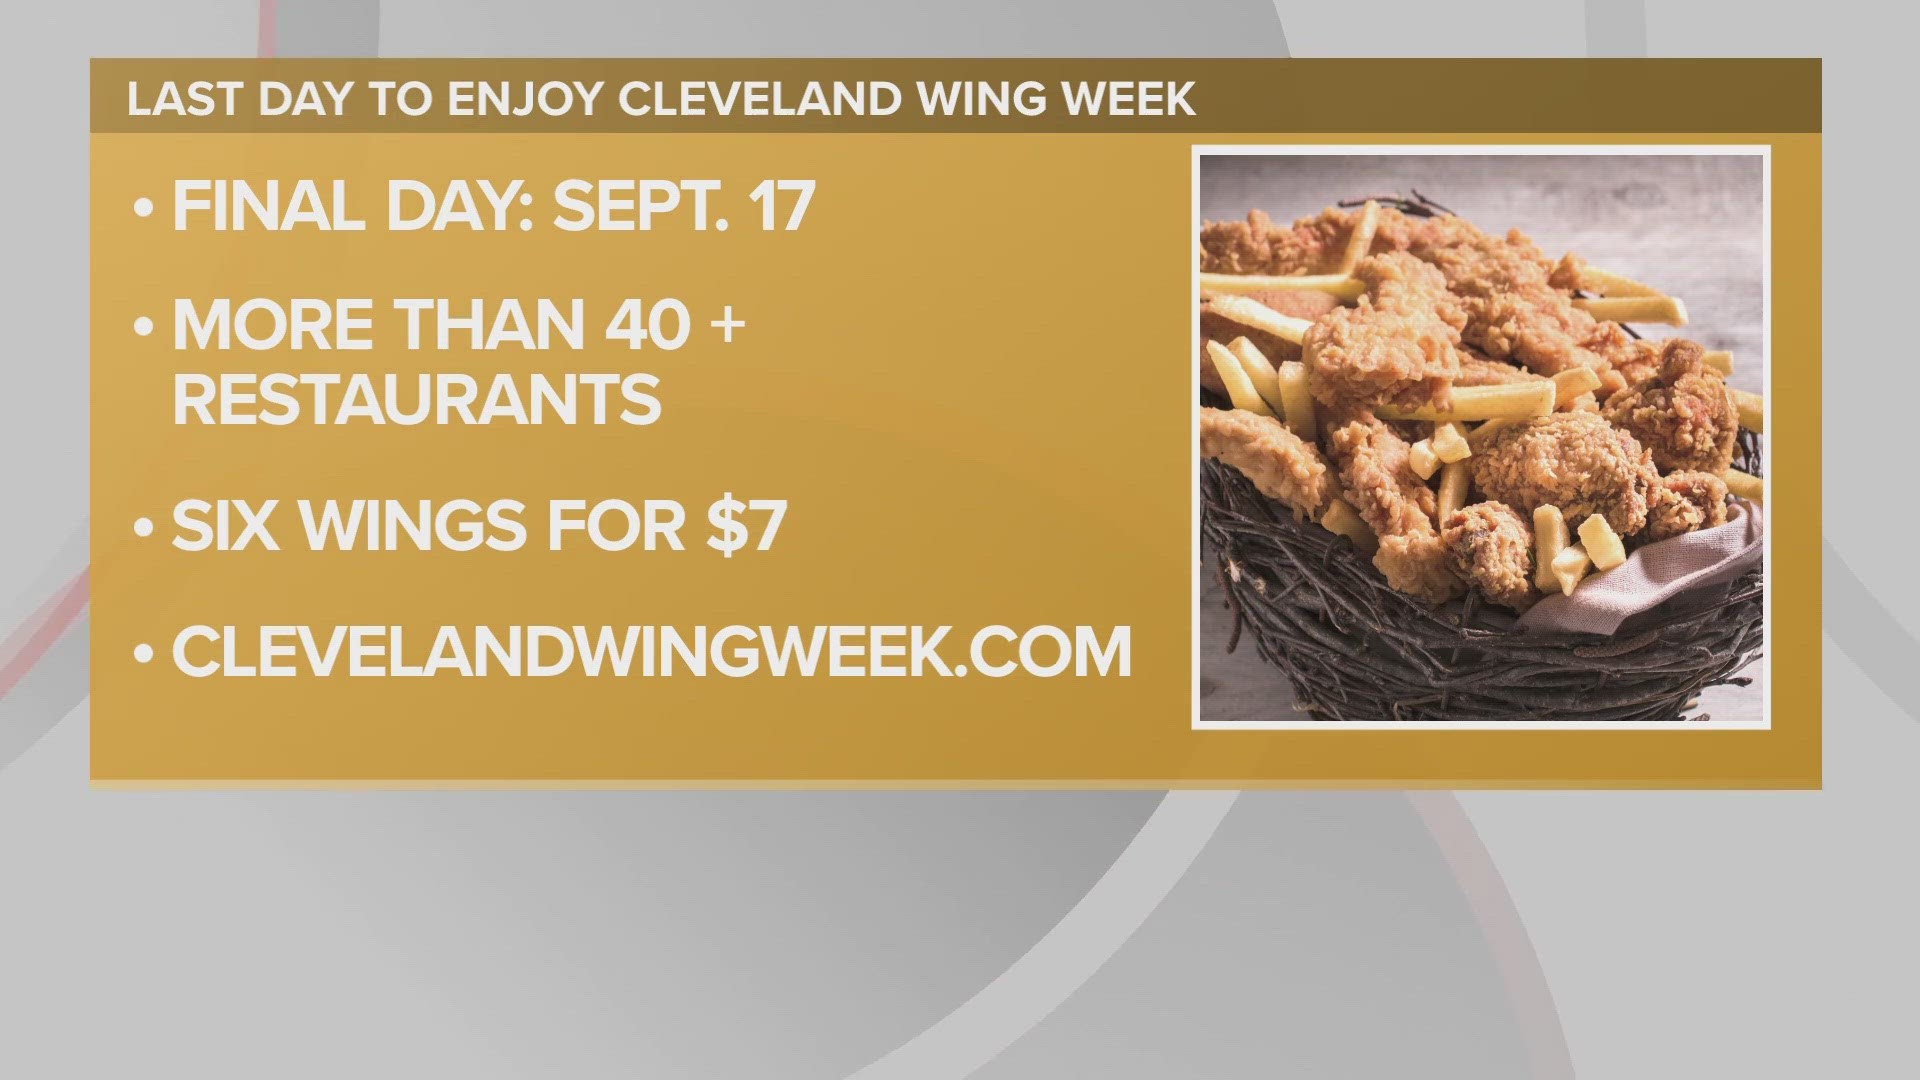 3News' Kierra Cotton is checking out the deals at 49th Street Tavern during Cleveland Wing Week.